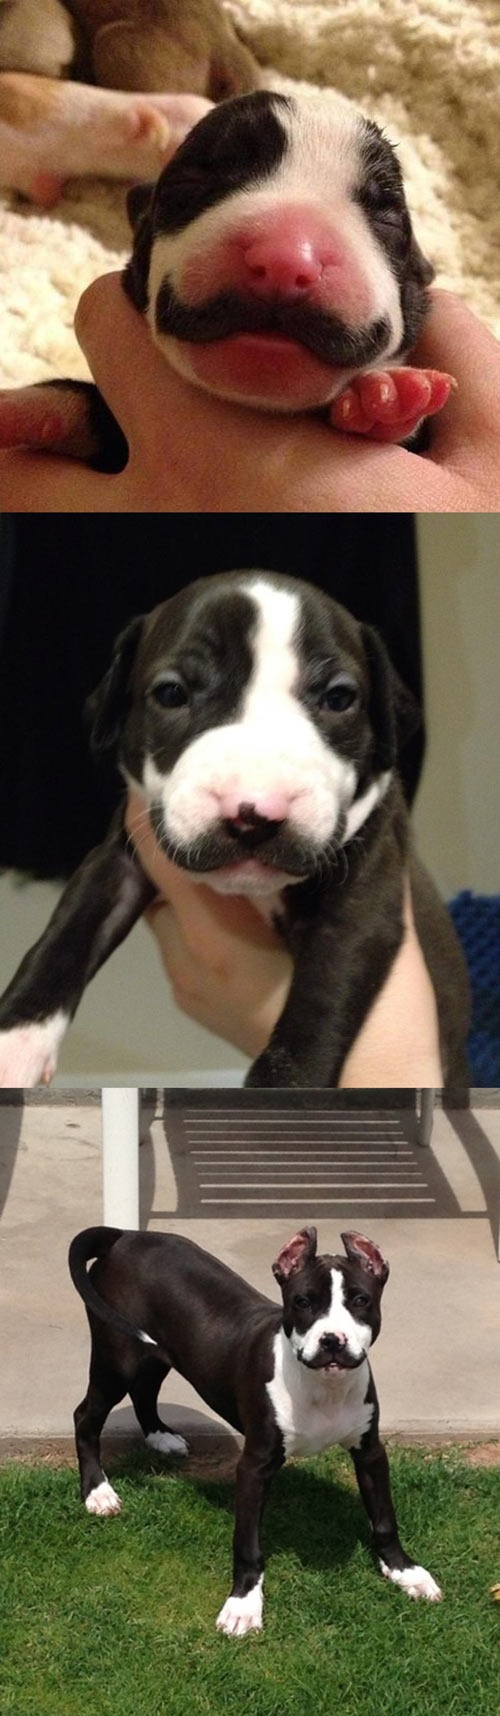 Dog with mustache !